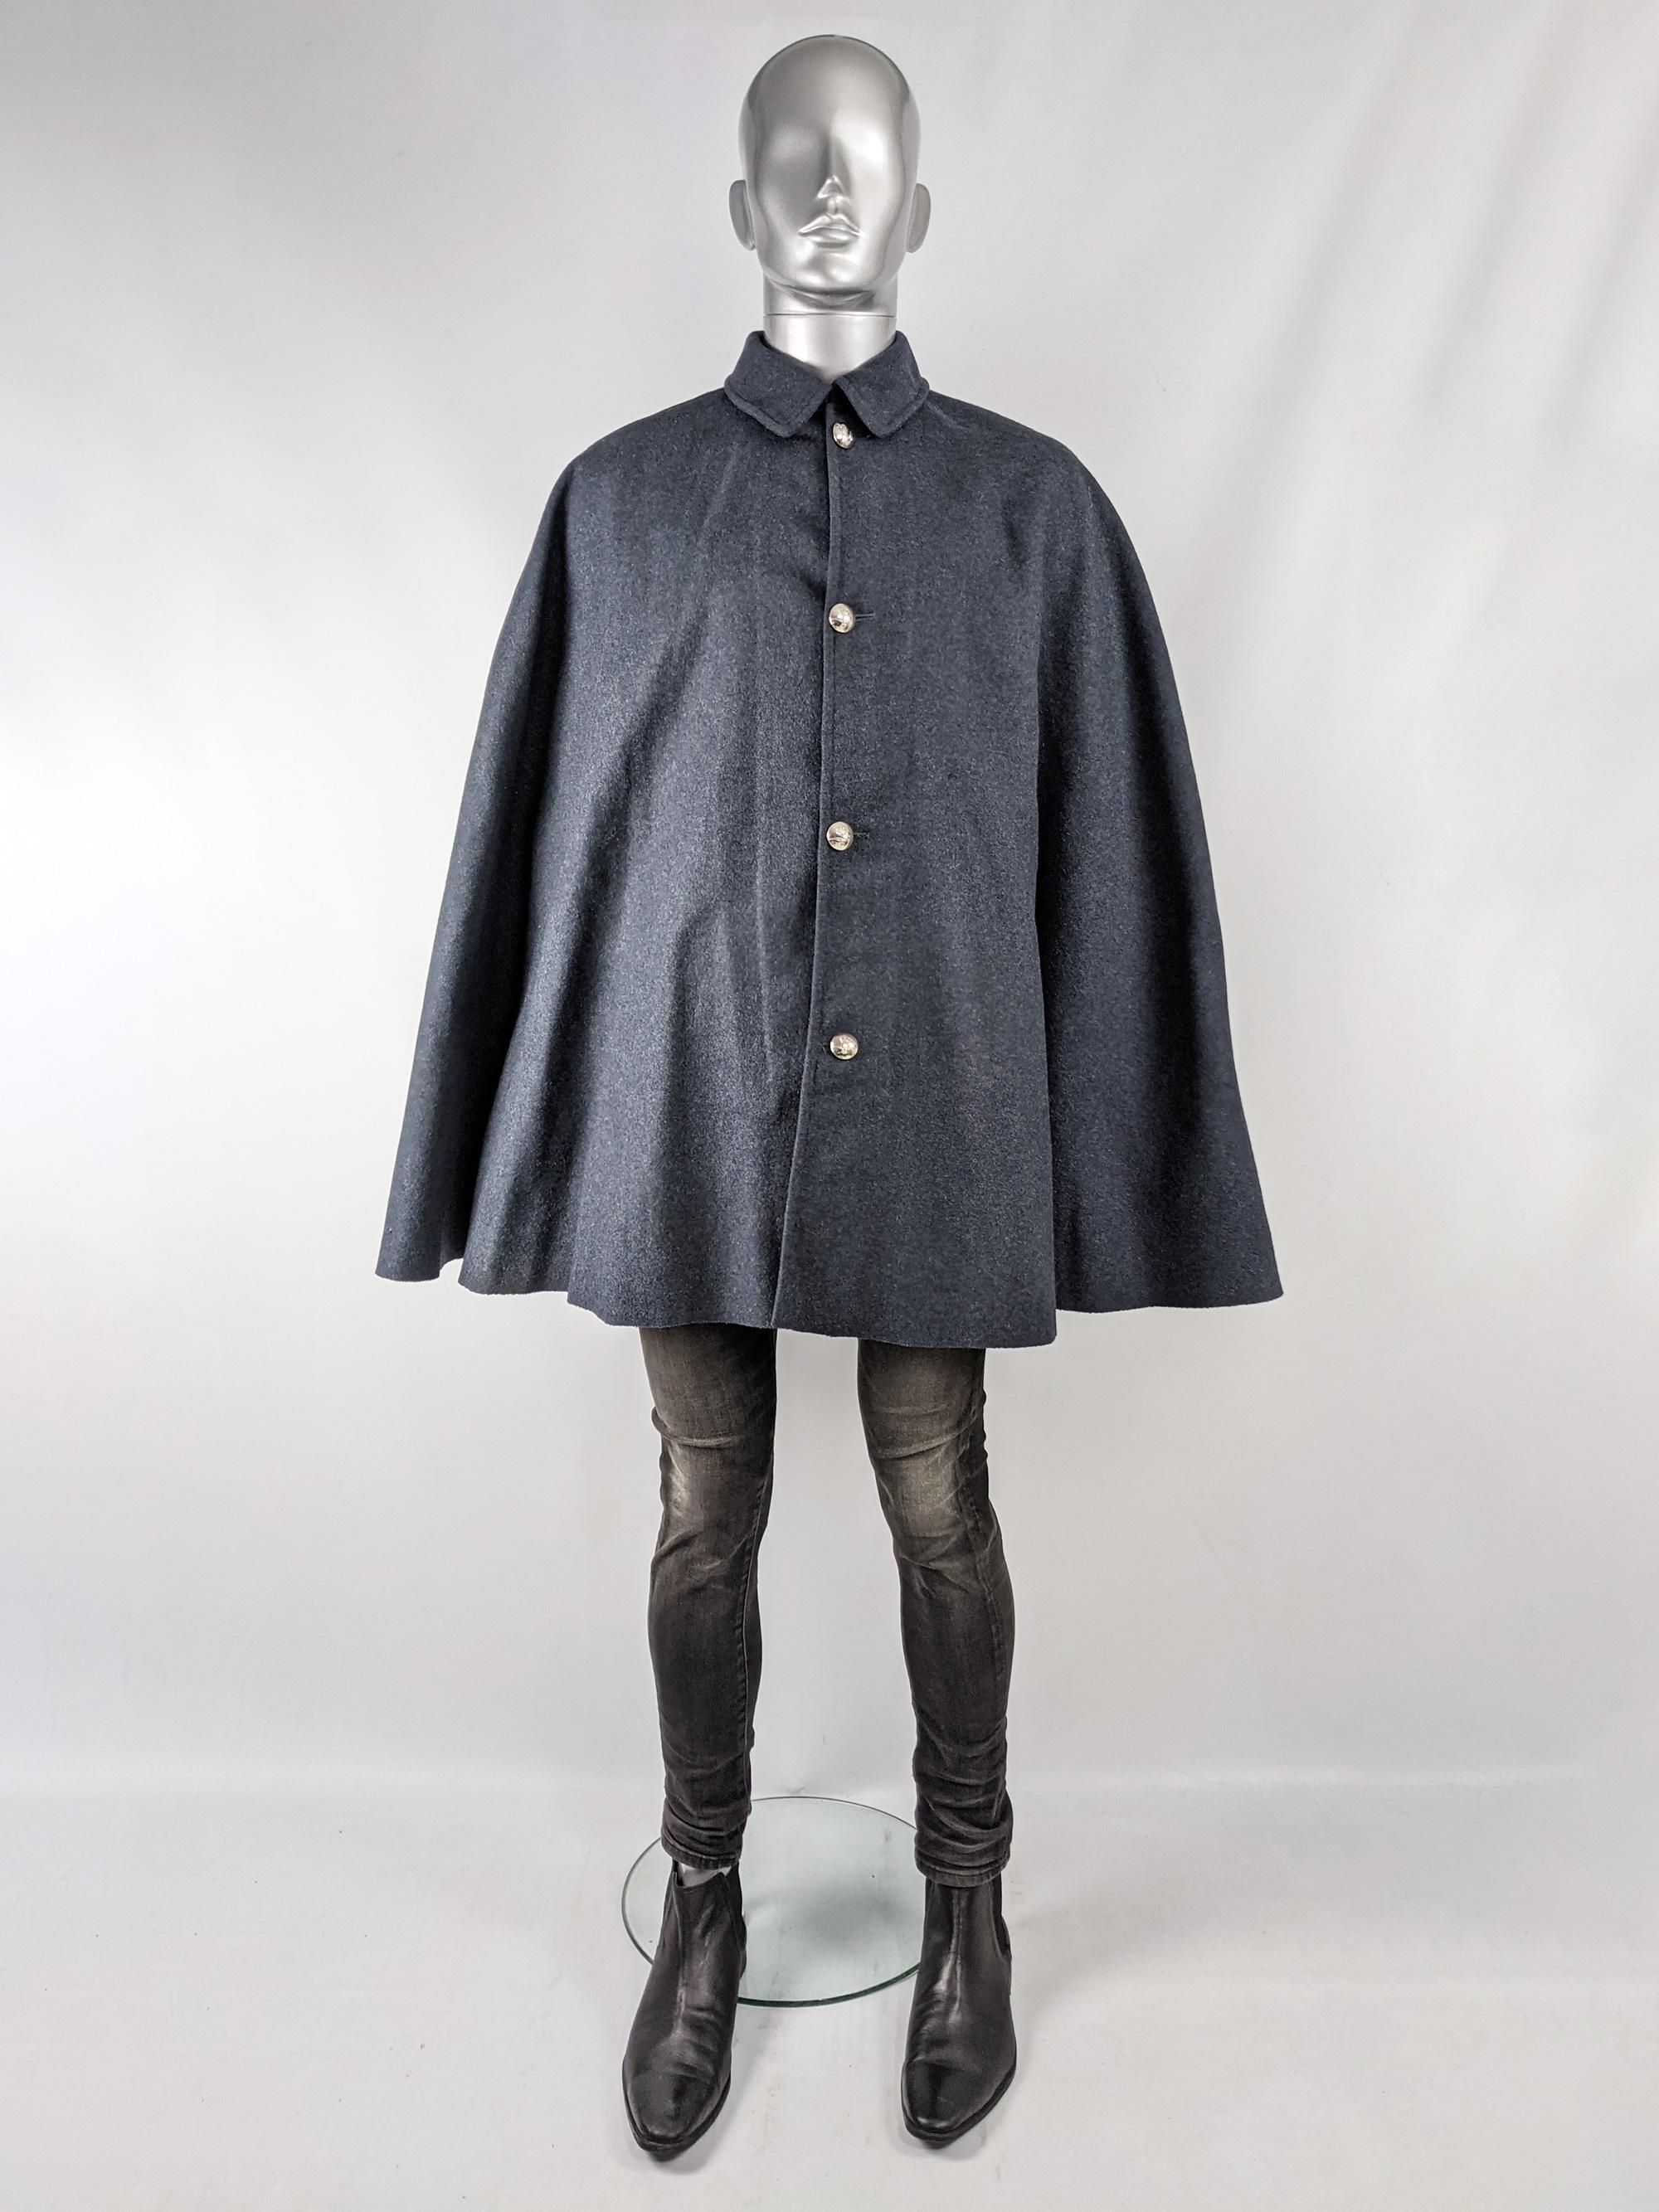 An amazing and rare vintage mens cape from the 60s by British tailors, J Compton Sons & Webb. In a grey wool with the slightest hint of blue. It fastens at the front with silver military style buttons and has an amazing shape that gives a mod /